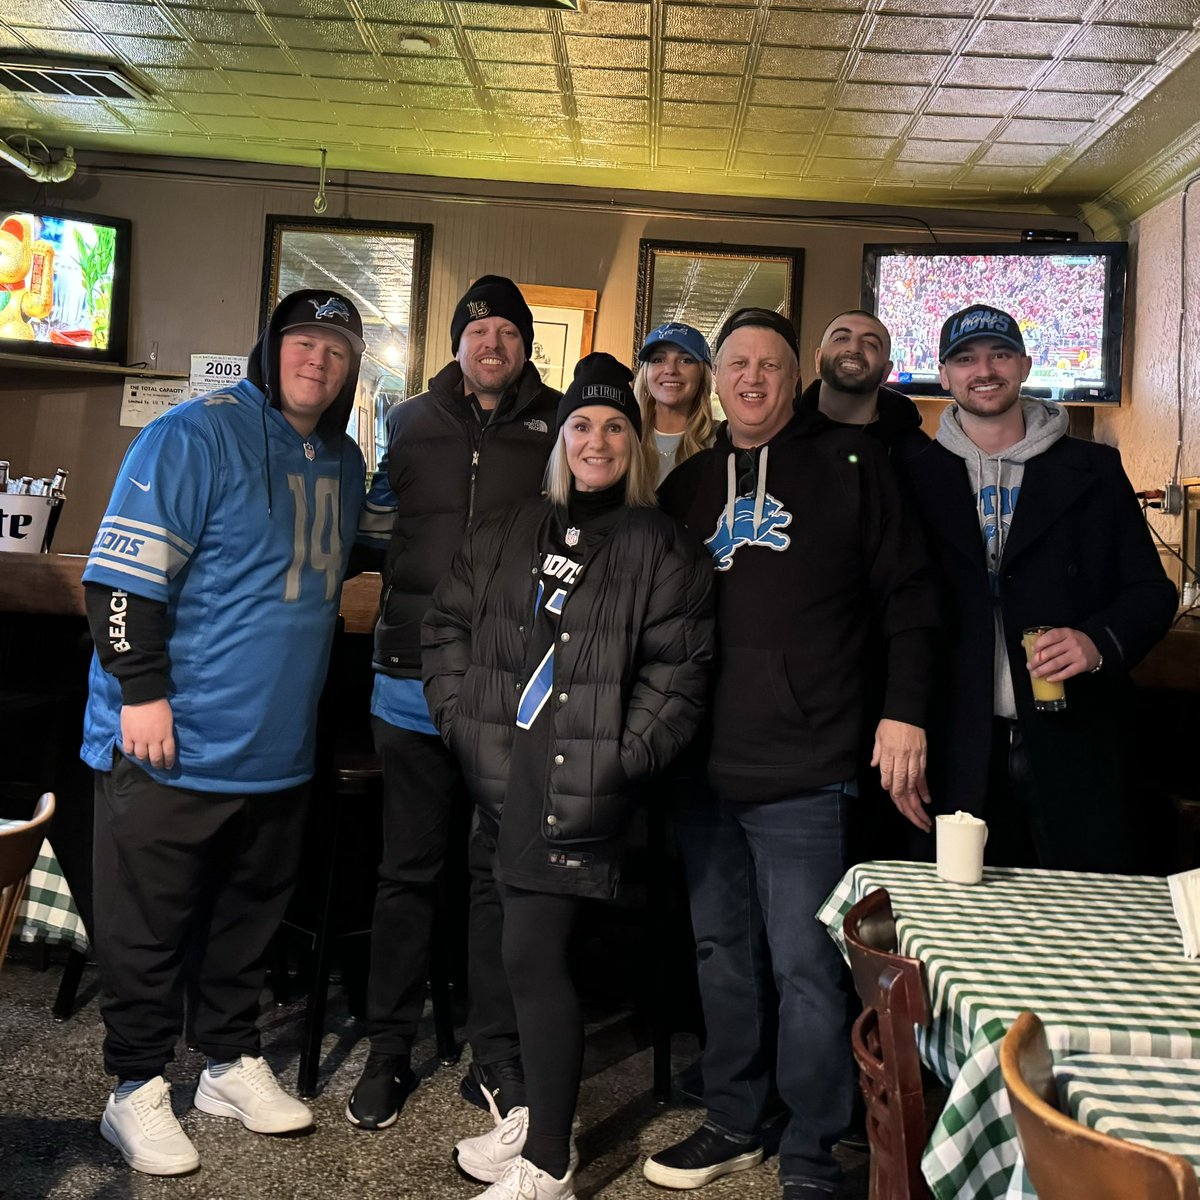 What an amazing day with this crew! Way to go #Lions! So great to be back home in #Detroit to watch history being made! #lionspride #DetroitLions